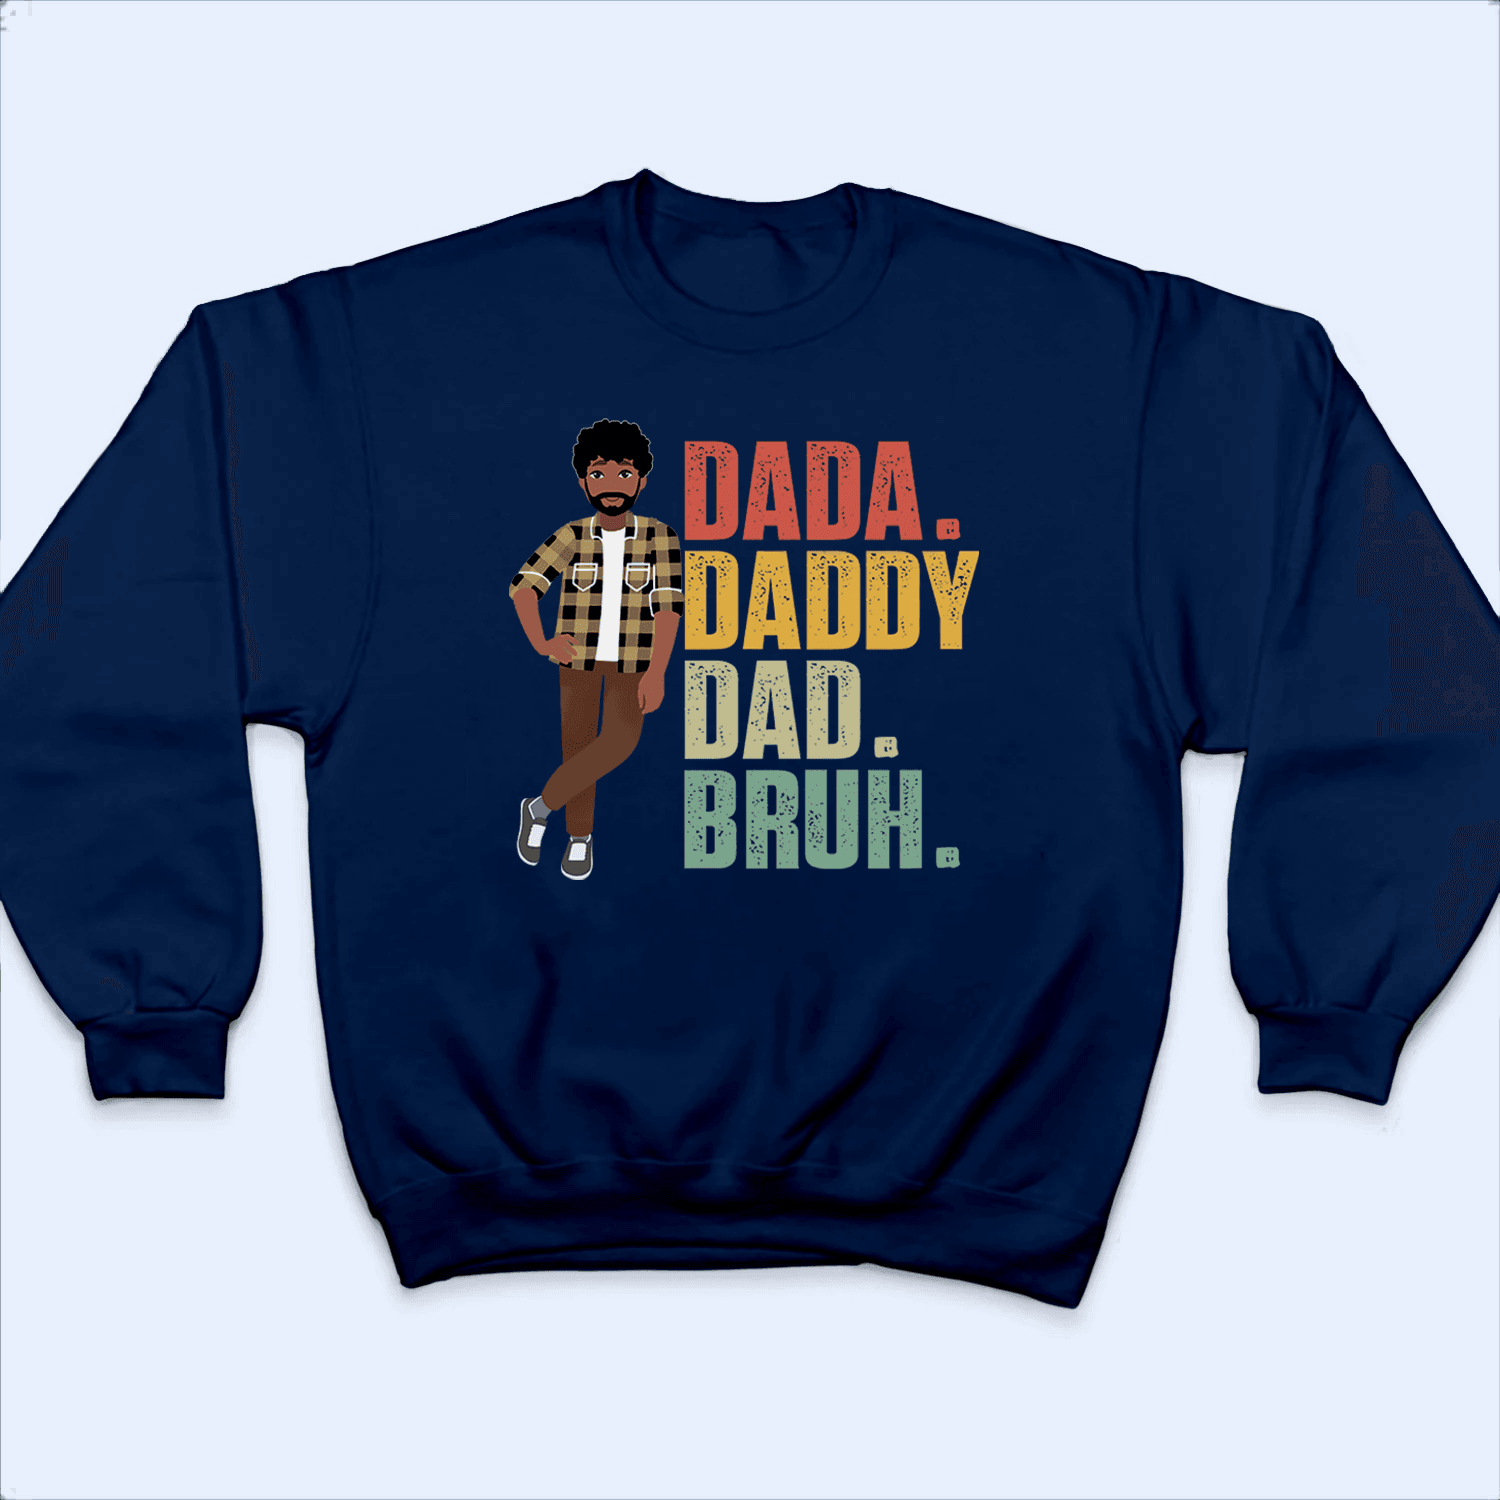 Dada Daddy Dad Bruh - Funny Fathers Day - Personalized Custom T Shirt - Birthday, Loving, Funny Gift for Grandfather/Dad/Father, Husband, Grandparent - Suzitee Store